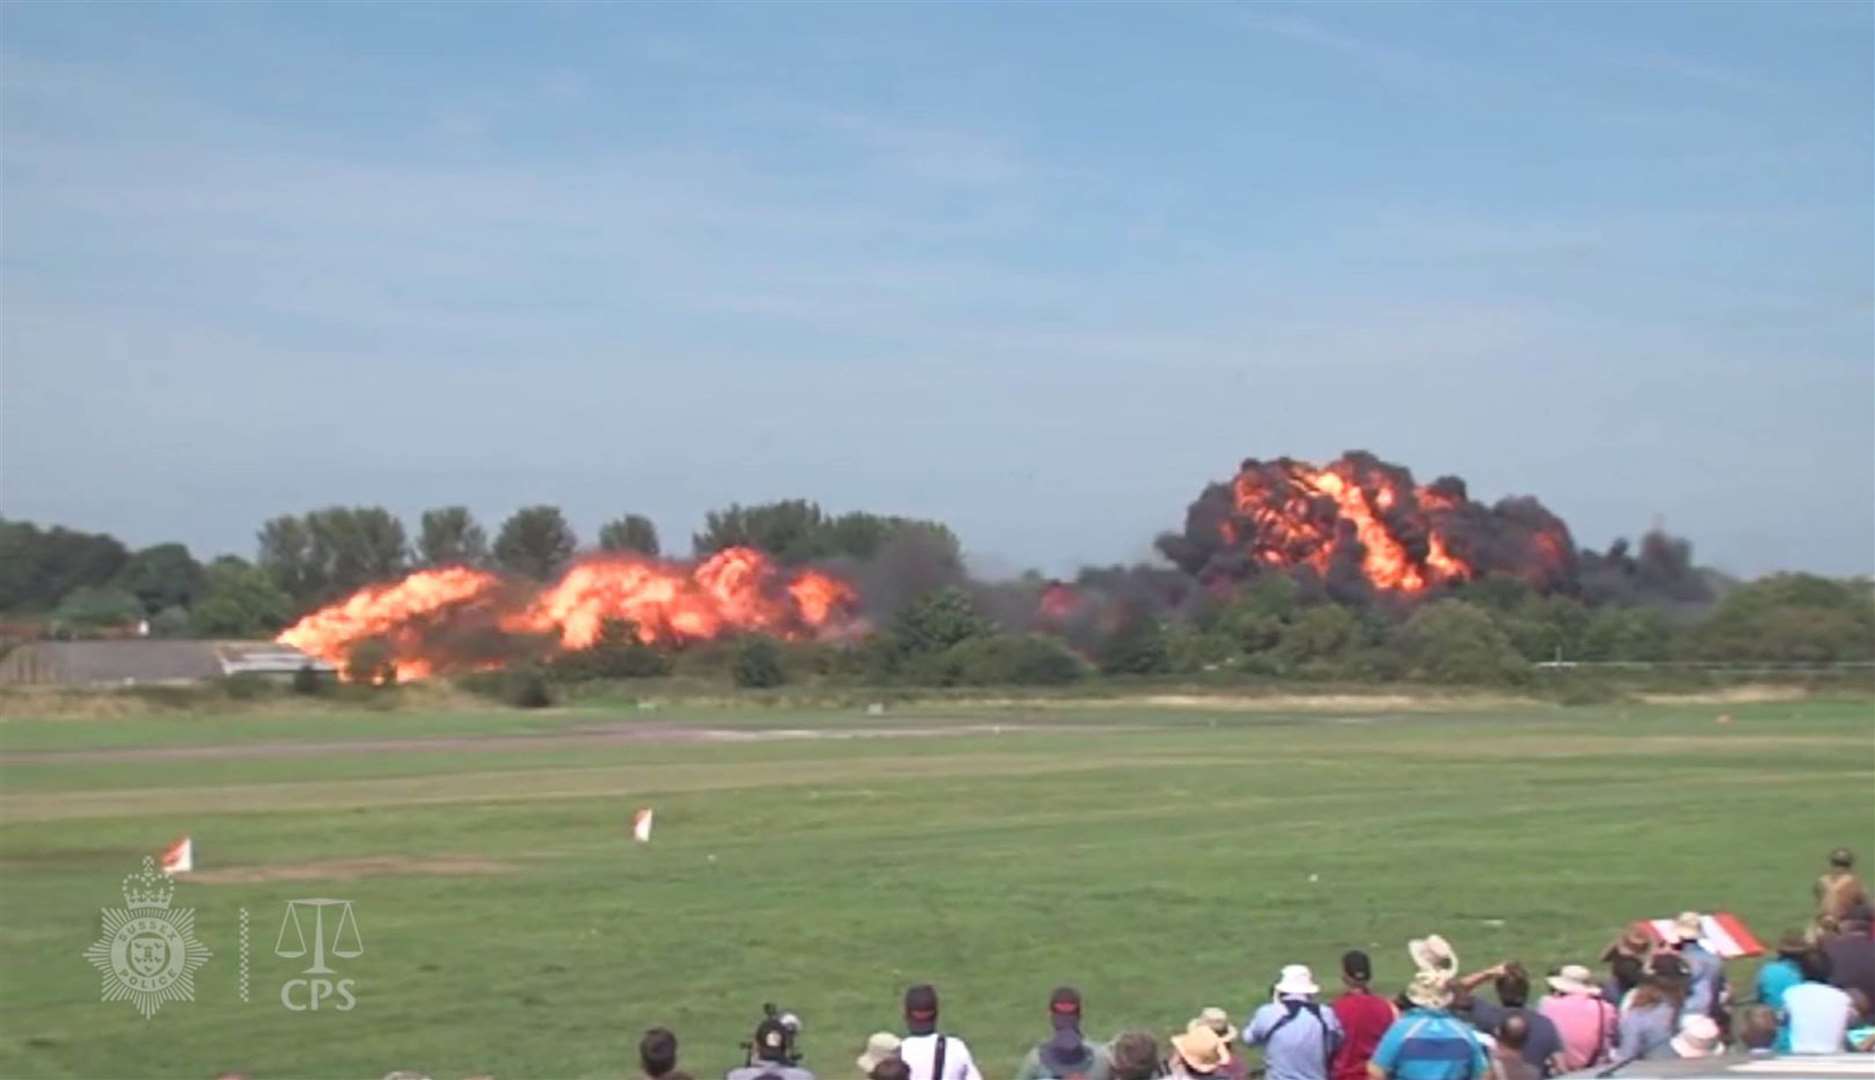 A Hawker Hunter jet exploded in a fireball at the airshow in August 2015 (Screengrab/Sussex Police and CPS/PA)